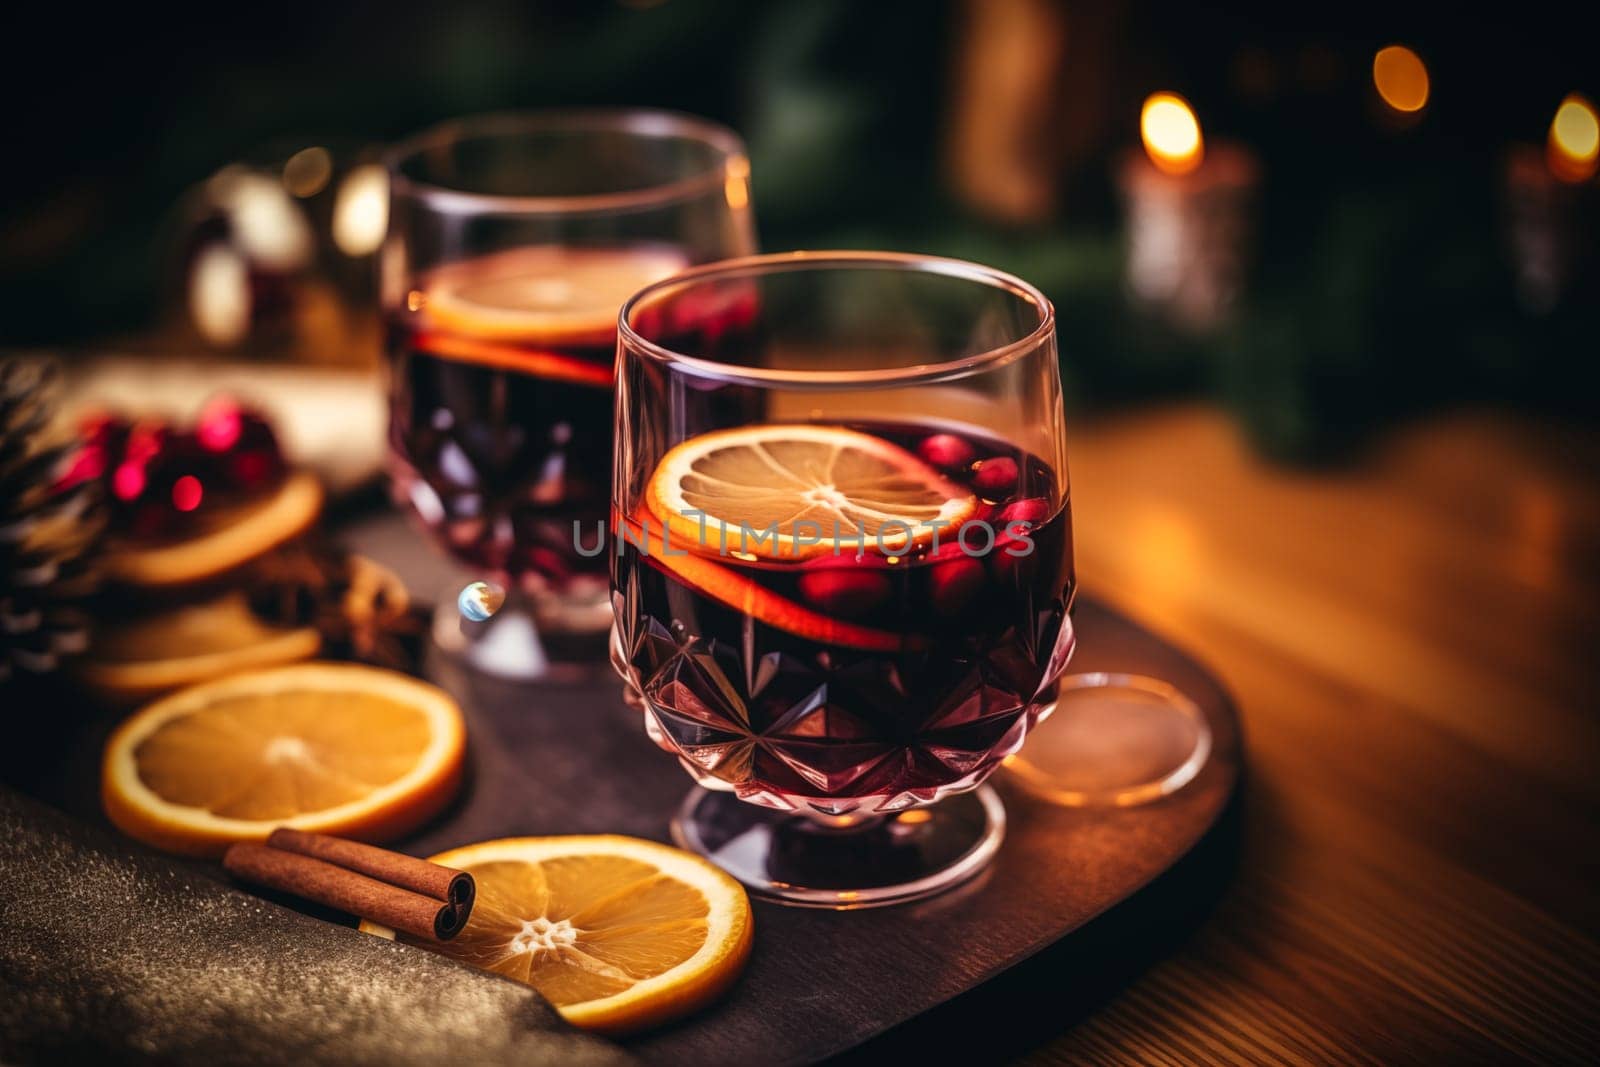 Two glasses of traditional mulled wine with orange and cranberry garnishes on a cozy Christmas table. The background is blurred with bokeh lights and candles, creating a warm and festive atmosphere